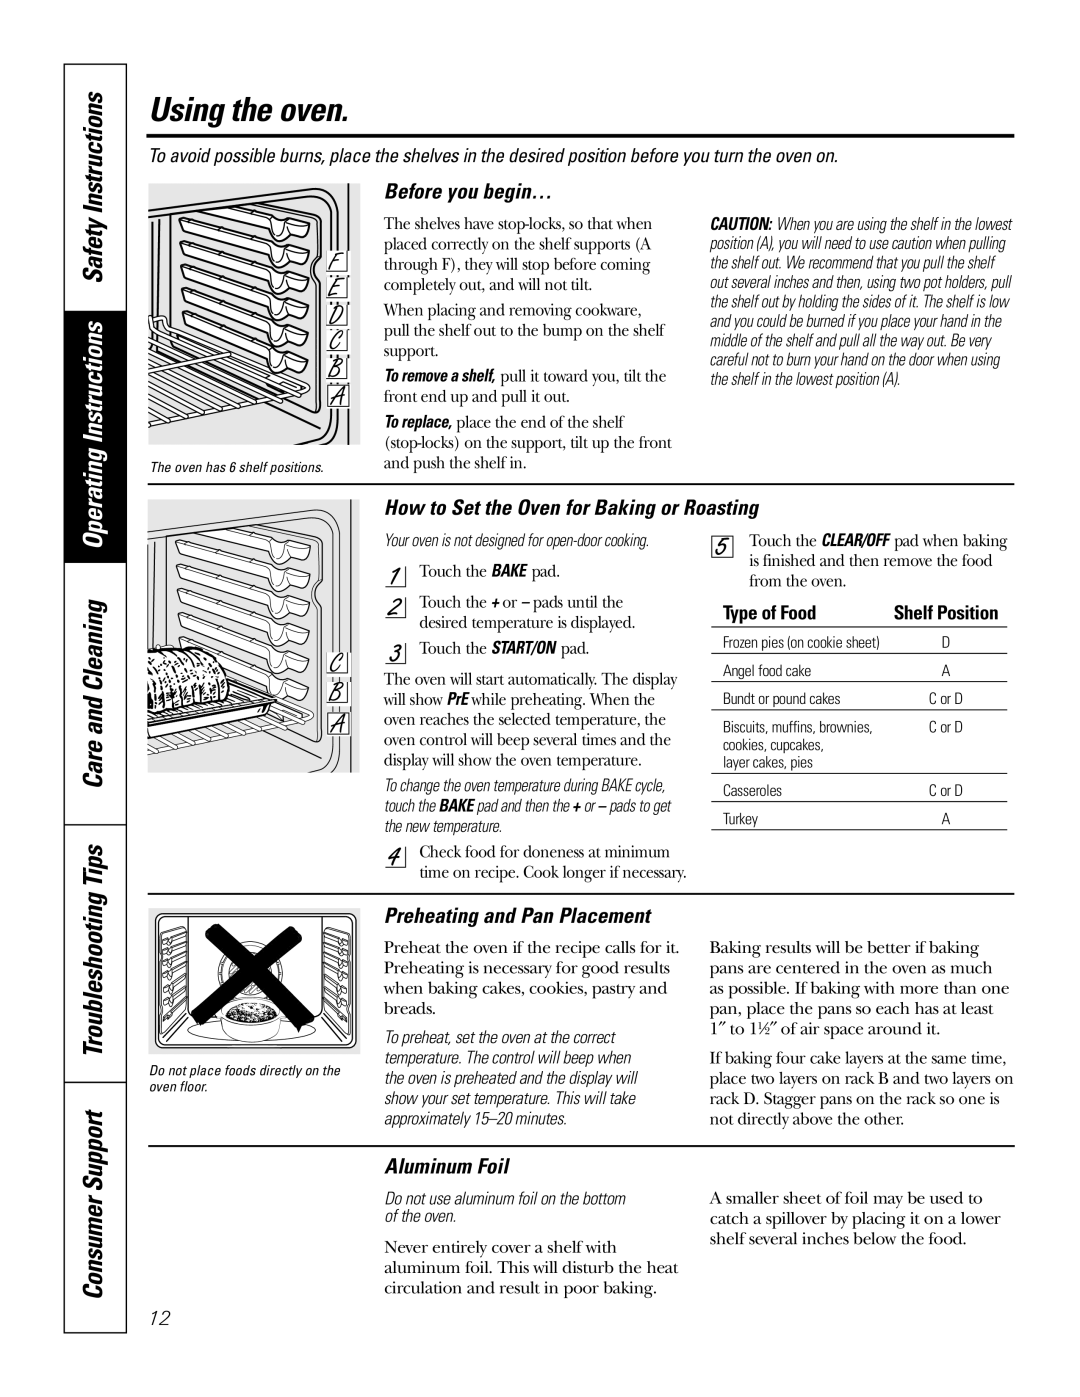 GE JB730, JB690 Instructions, Before you begin…, How to Set the Oven for Baking or Roasting, Preheating and Pan Placement 